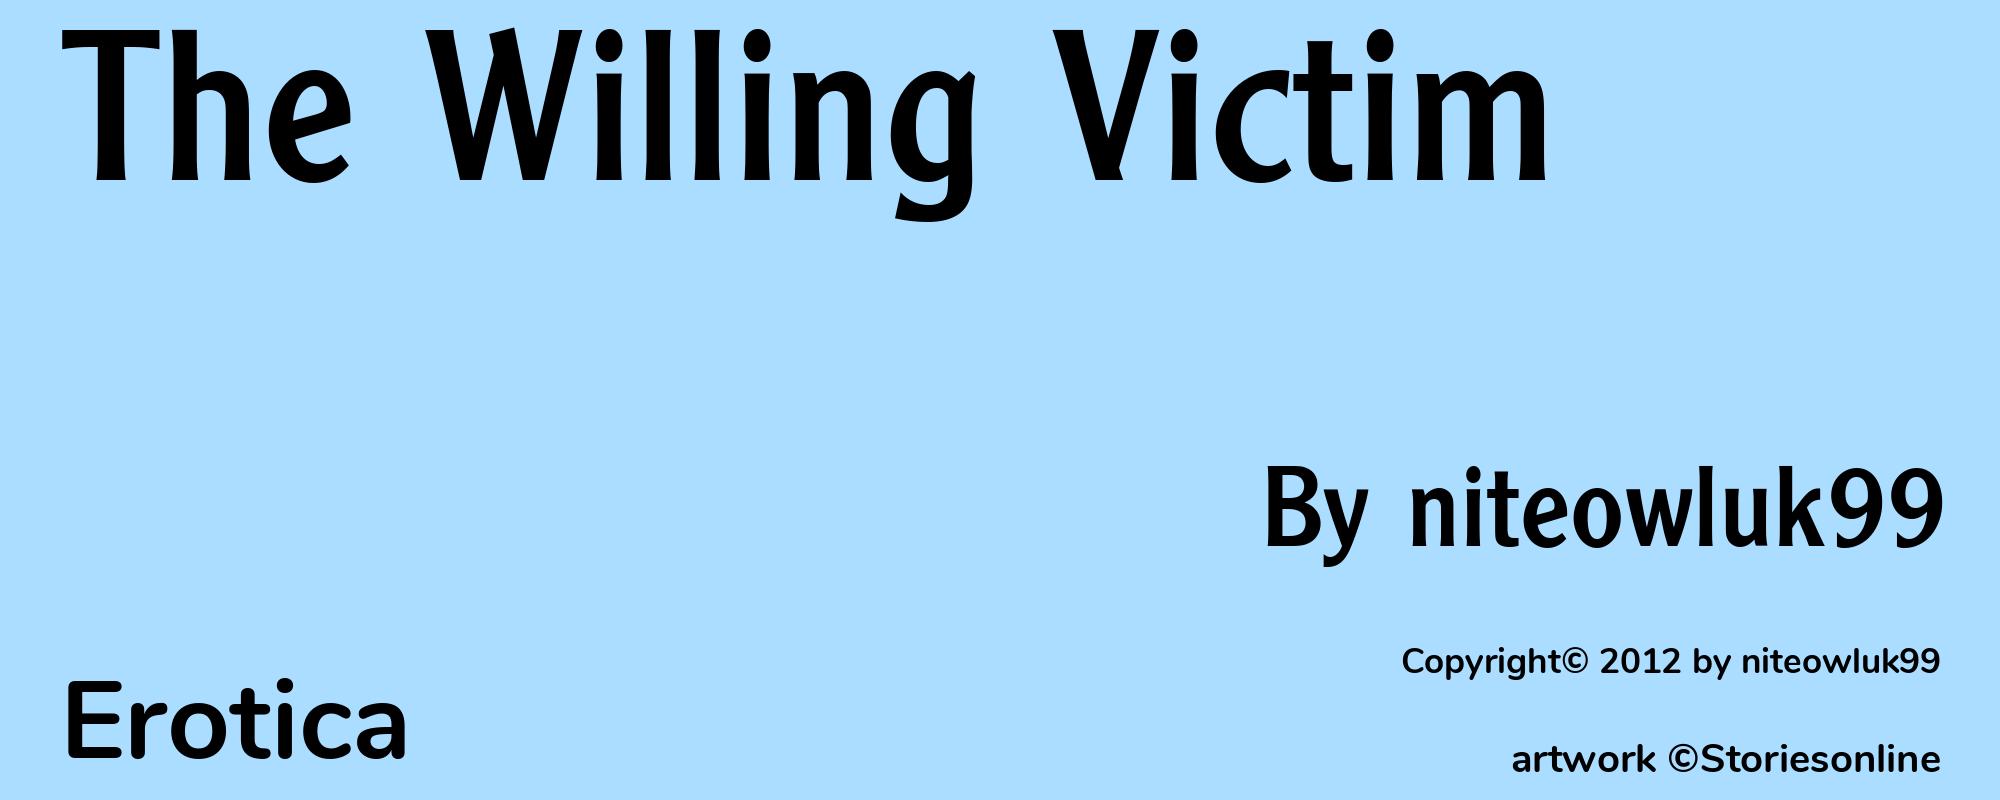 The Willing Victim - Cover